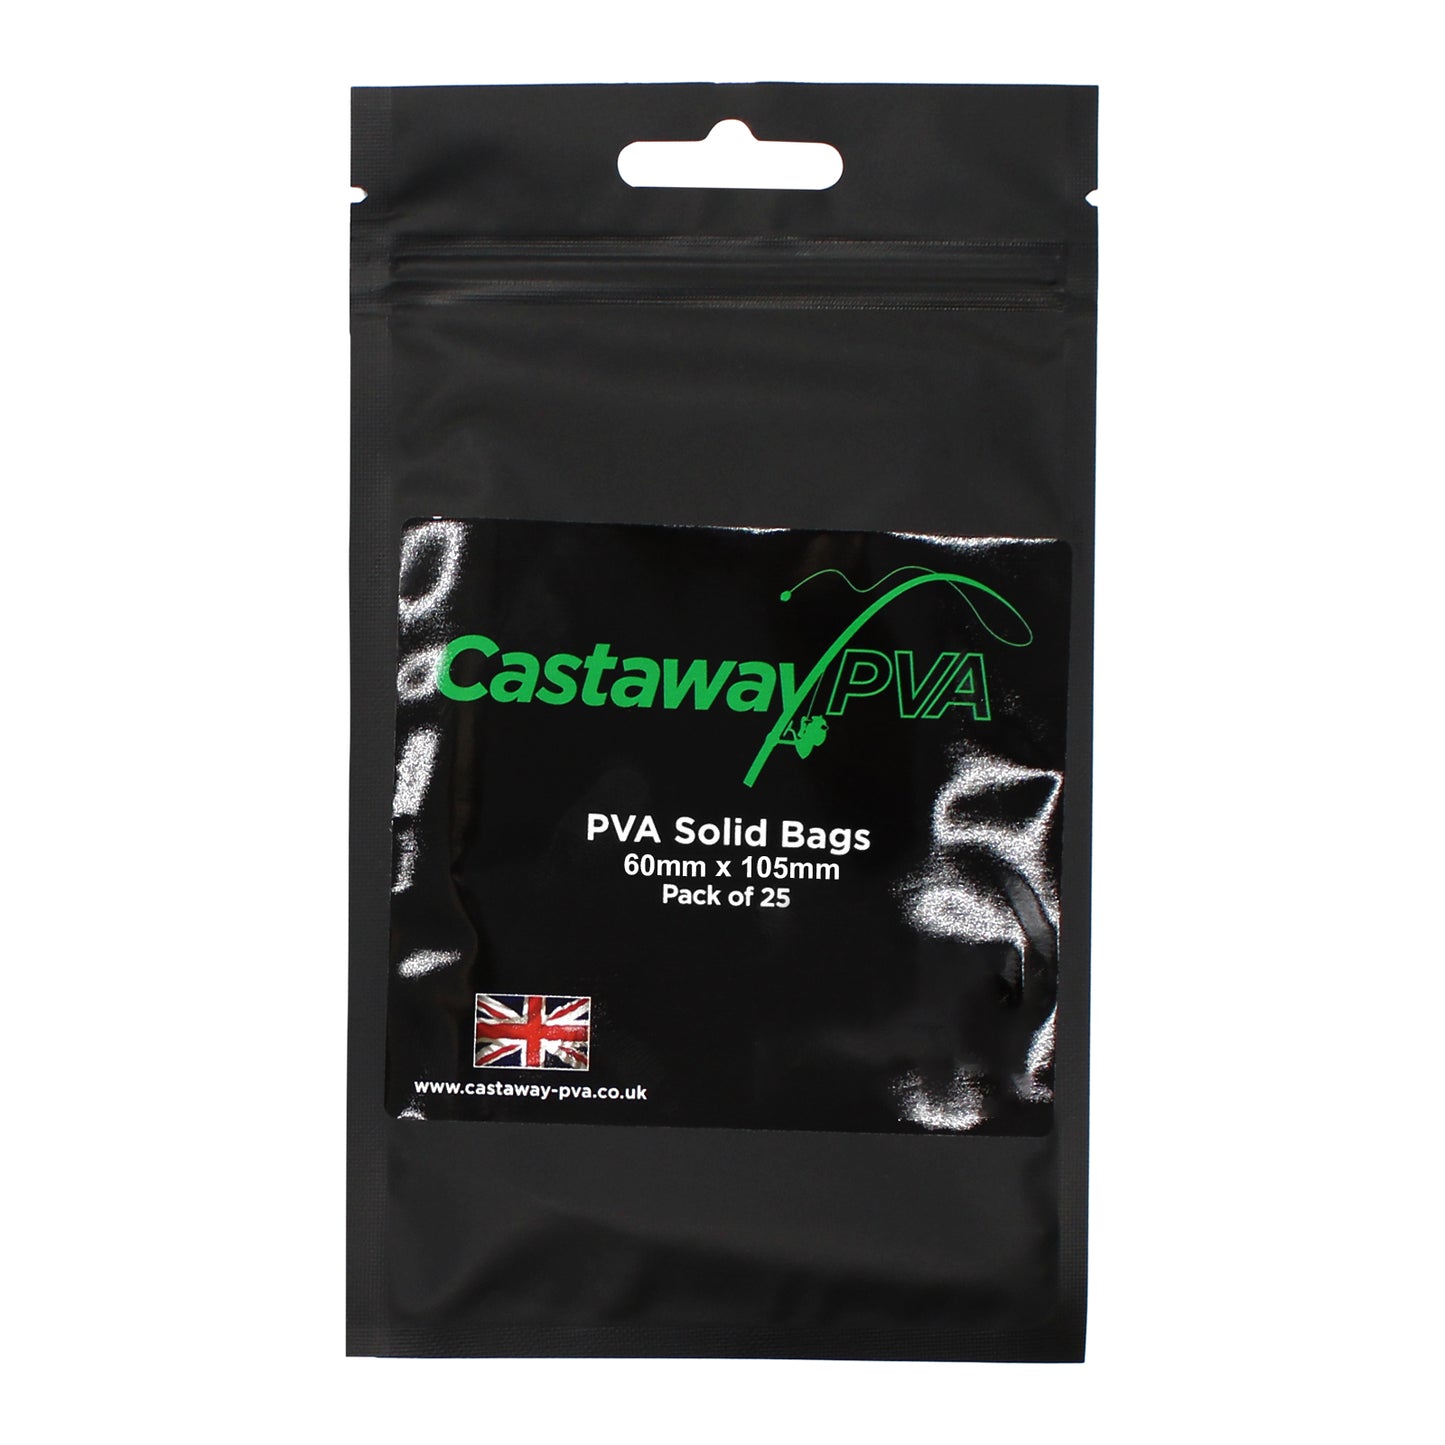 Castaway PVA Solid Bags 60mm x 105mm Pack of 25